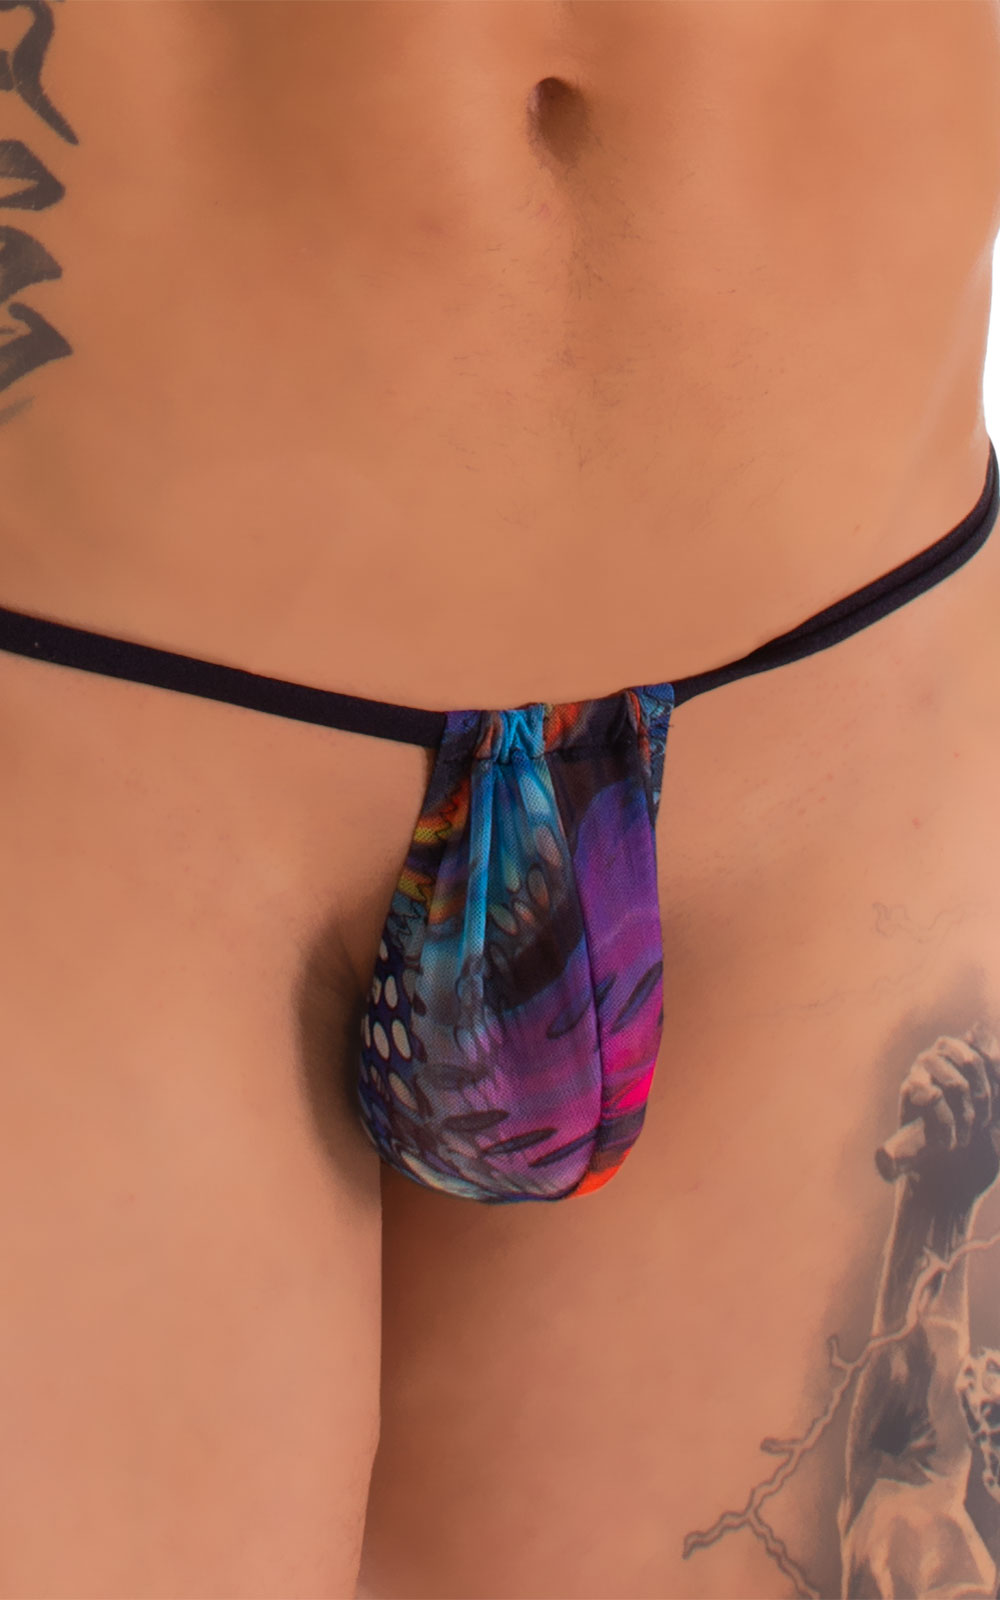 G String Swimsuit - Adjustable Pouch in Super Aquarious Mesh with Black Strings
, Front Alternative